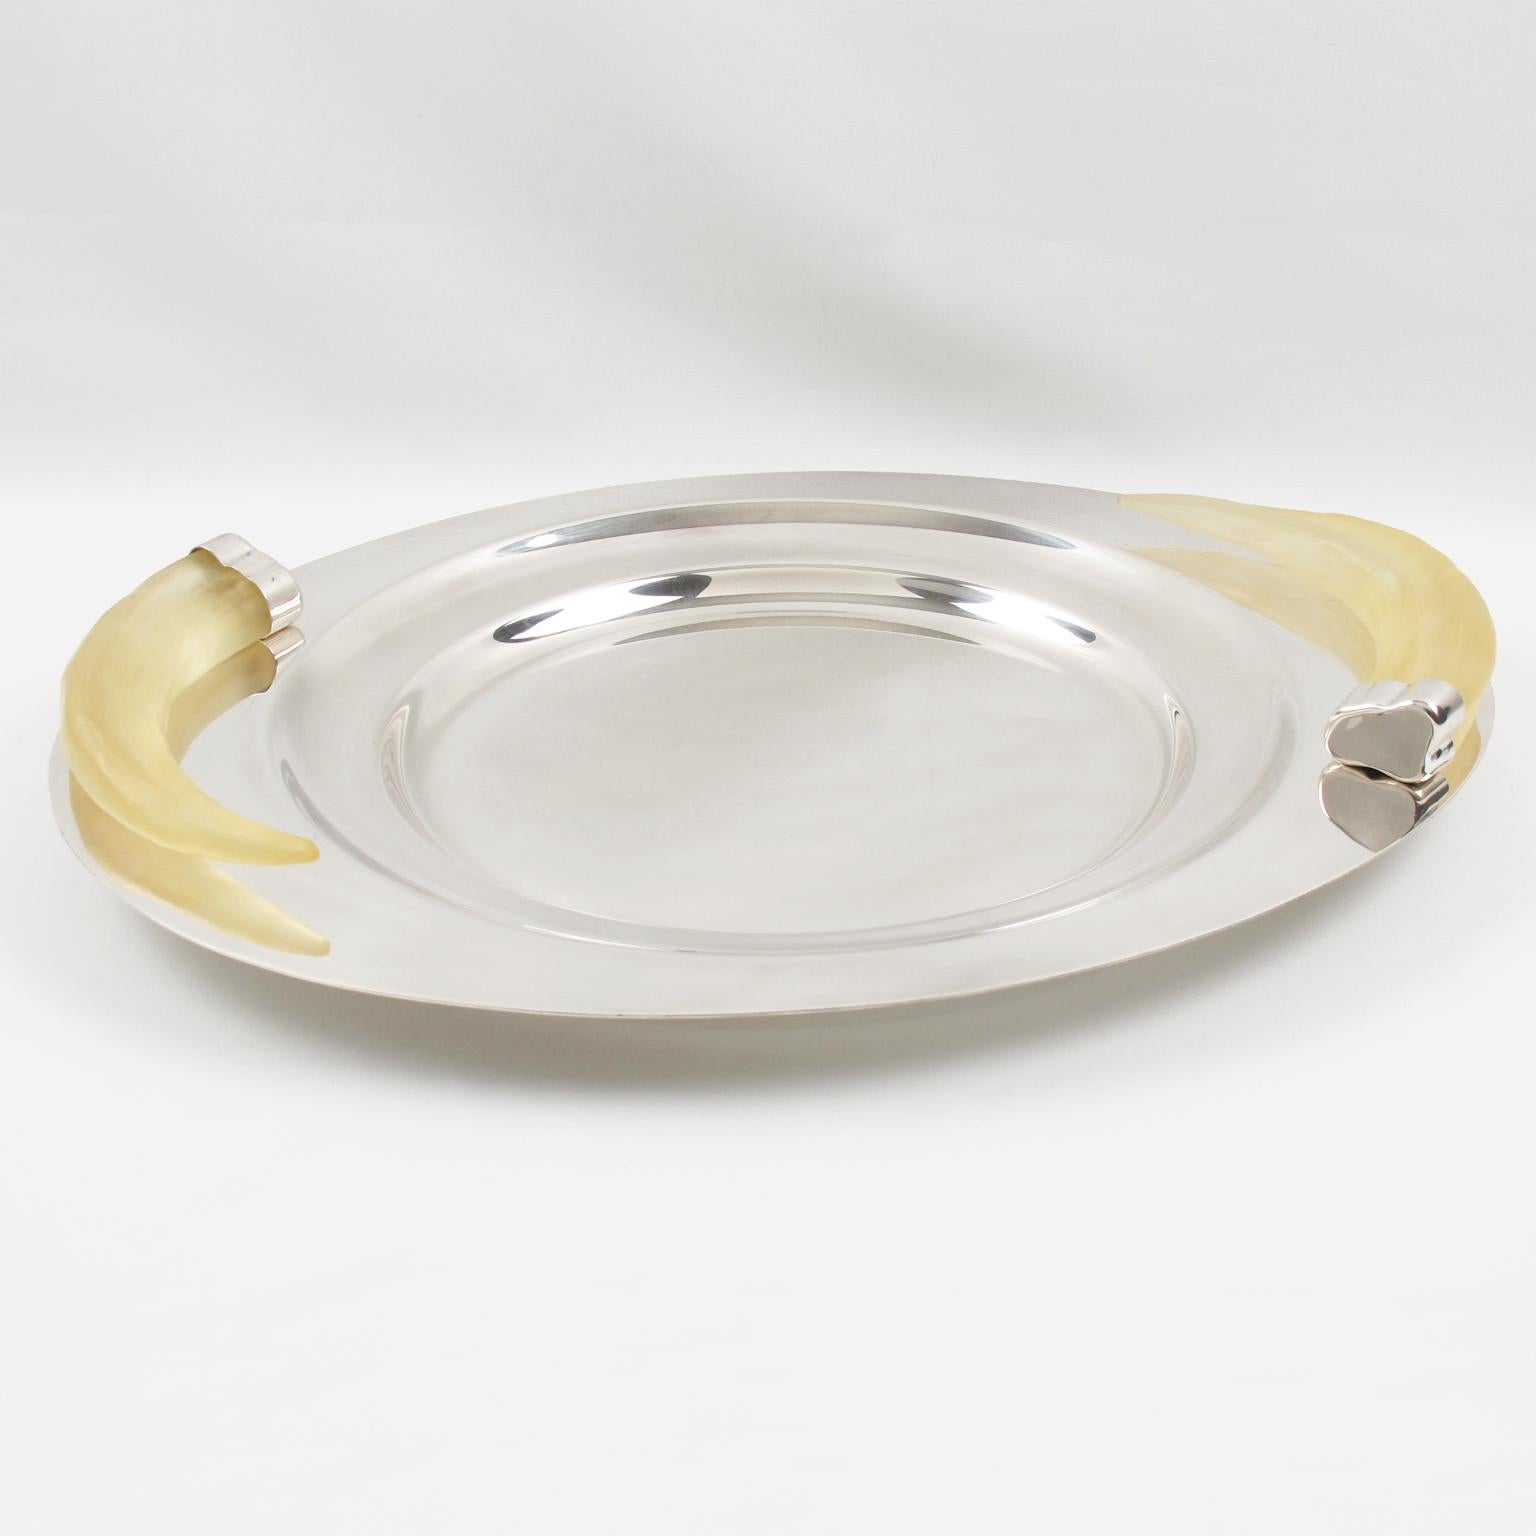 SIlversmith Prata Wolff designed this stunning large serving tray or centerpiece in the 1980s. The heavy silver plate platter is ornate with frosted Lucite carved horn-shaped handles. This superb modernist design was created by this German-origin